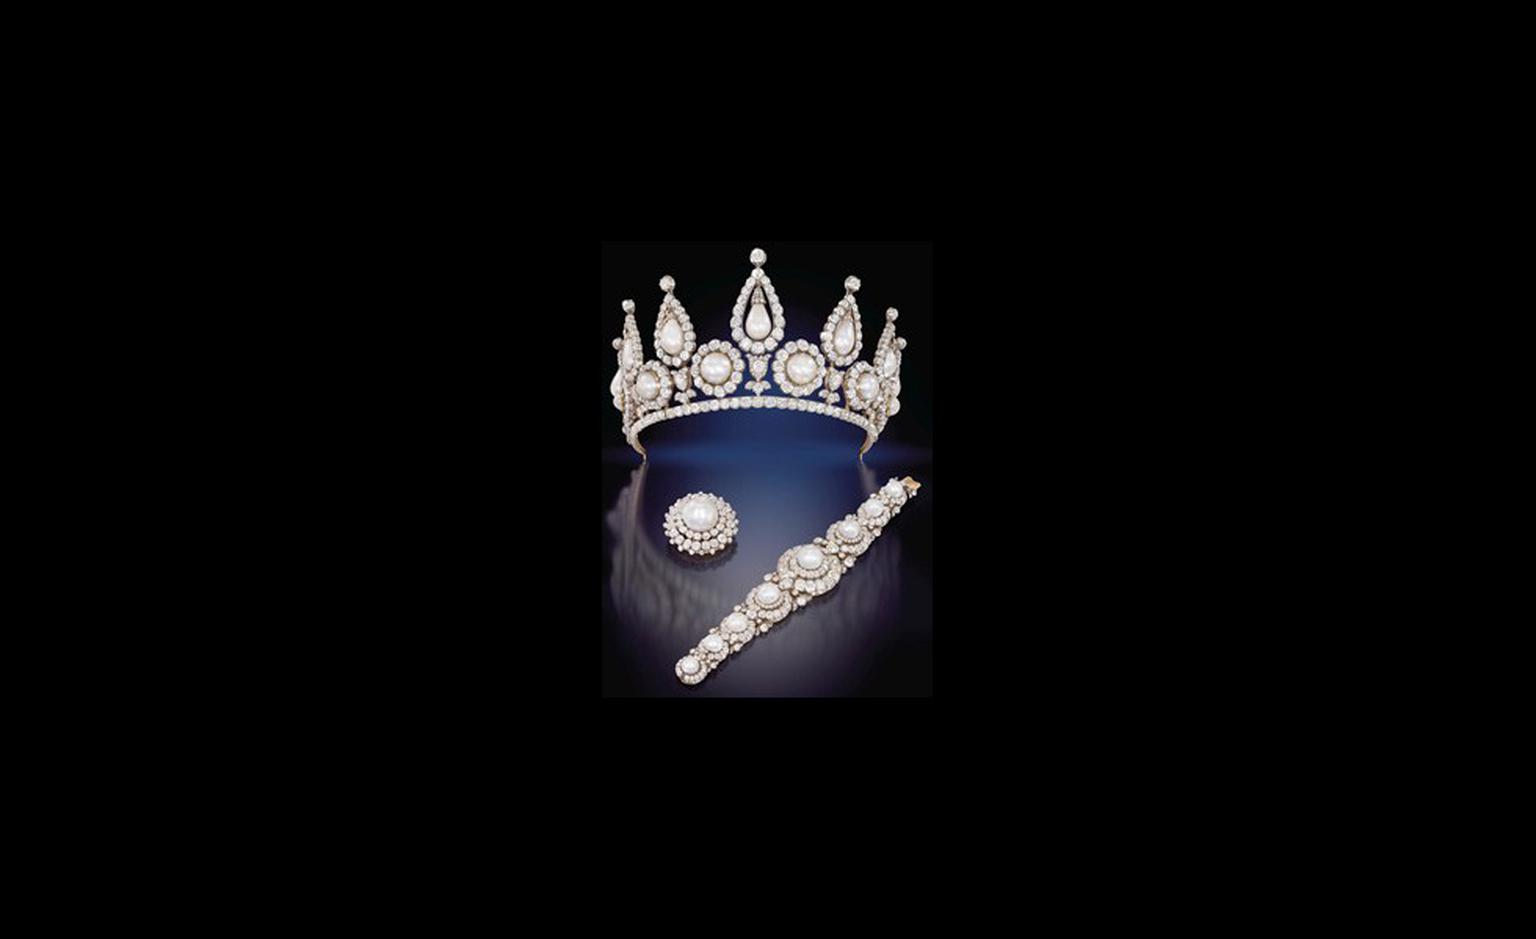 Lot 285 and Lot 286 Rosebery tiara with brooch and bracelet featuring natural pearls and diamonds. The pearls detach from the tiara. TIARA SOLD FOR £1,161,250. BRACELET AND BROOCH SOLD FOR £577,250